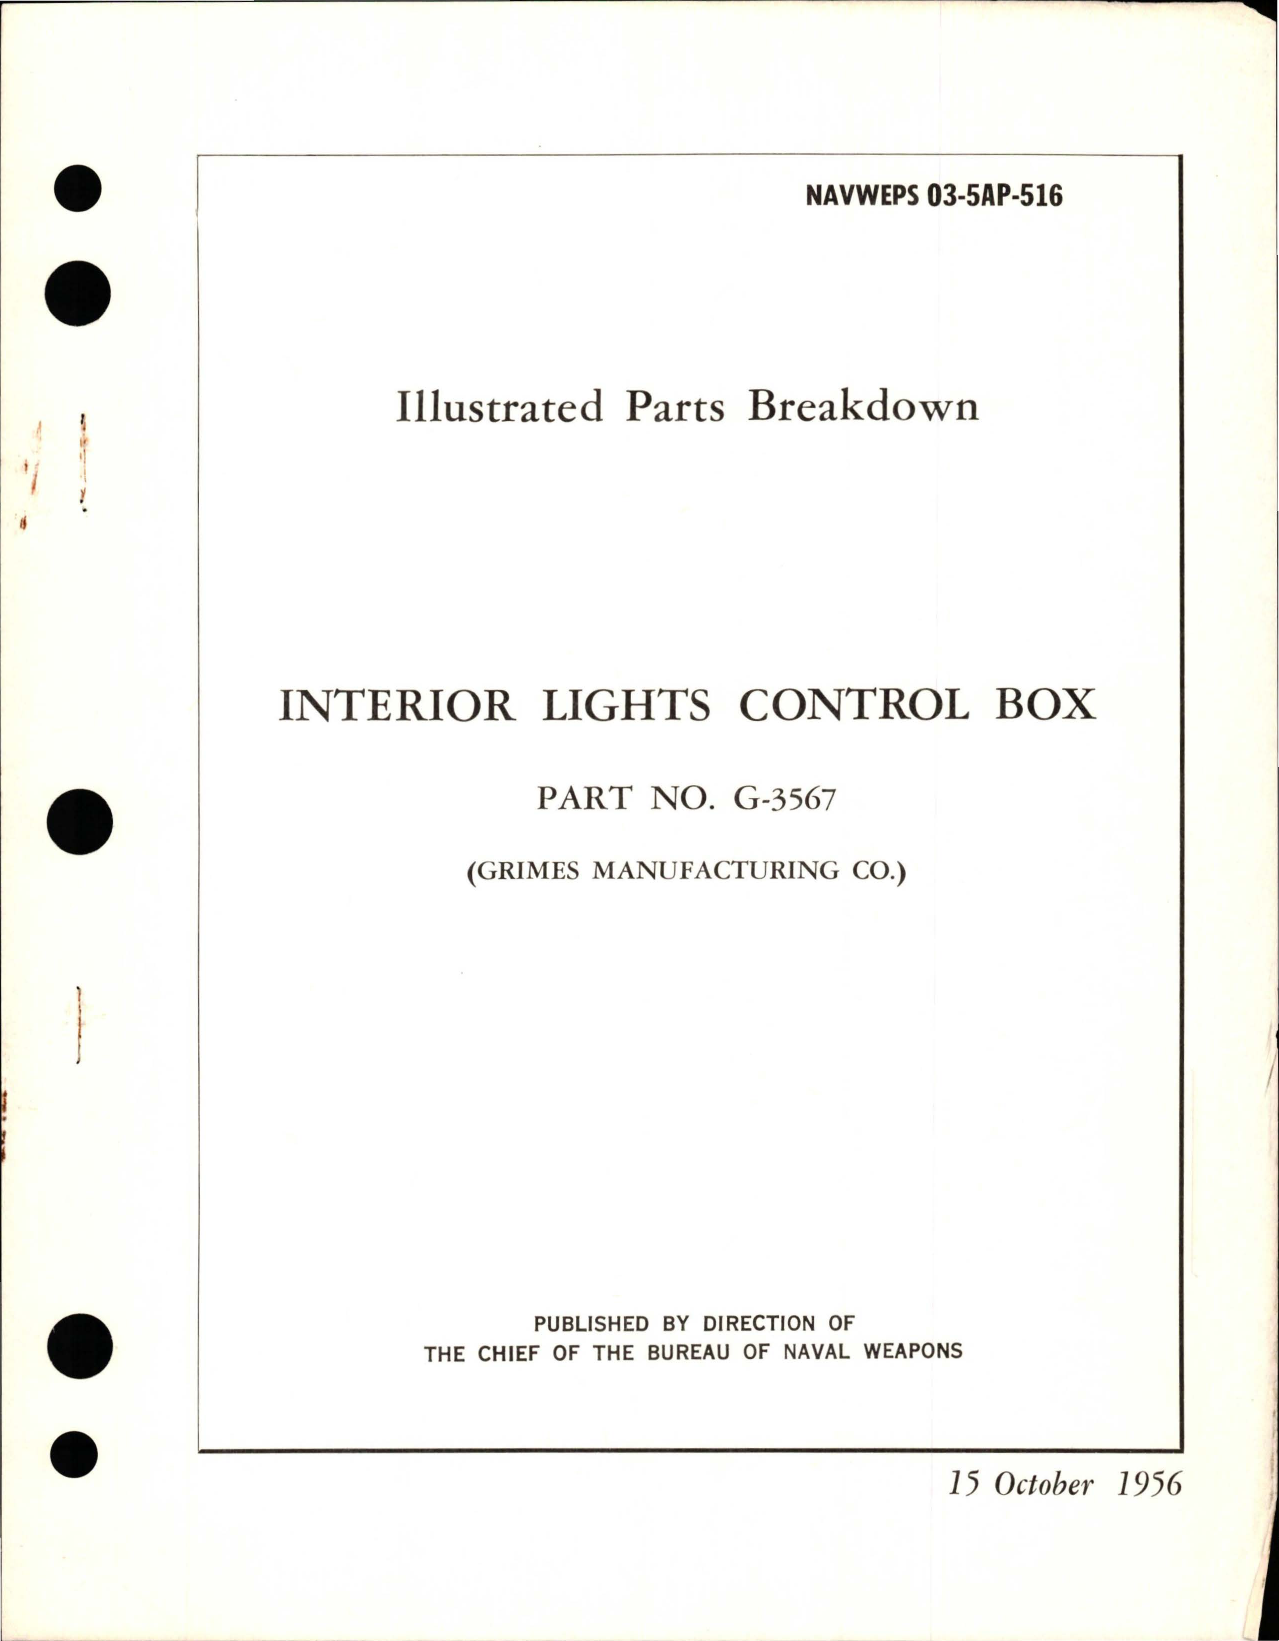 Sample page 1 from AirCorps Library document: Illustrated Parts Breakdown for Interior Lights Control Box - Part G-3567